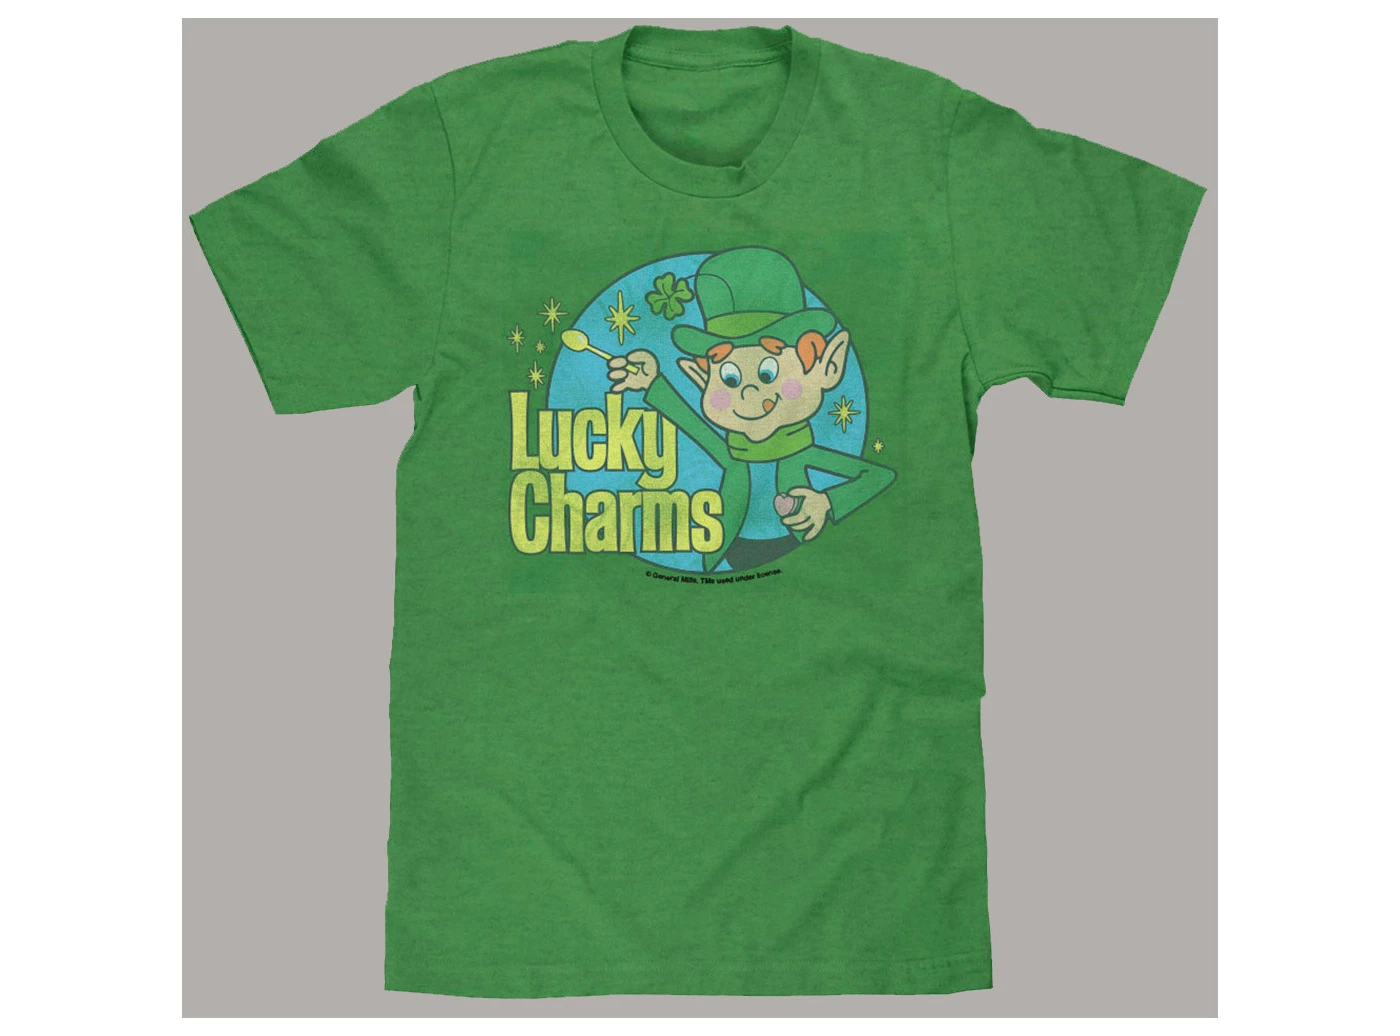 Men's Lucky Charms Short Sleeve Graphic T-Shirt Kelly Green - image 1 of 1